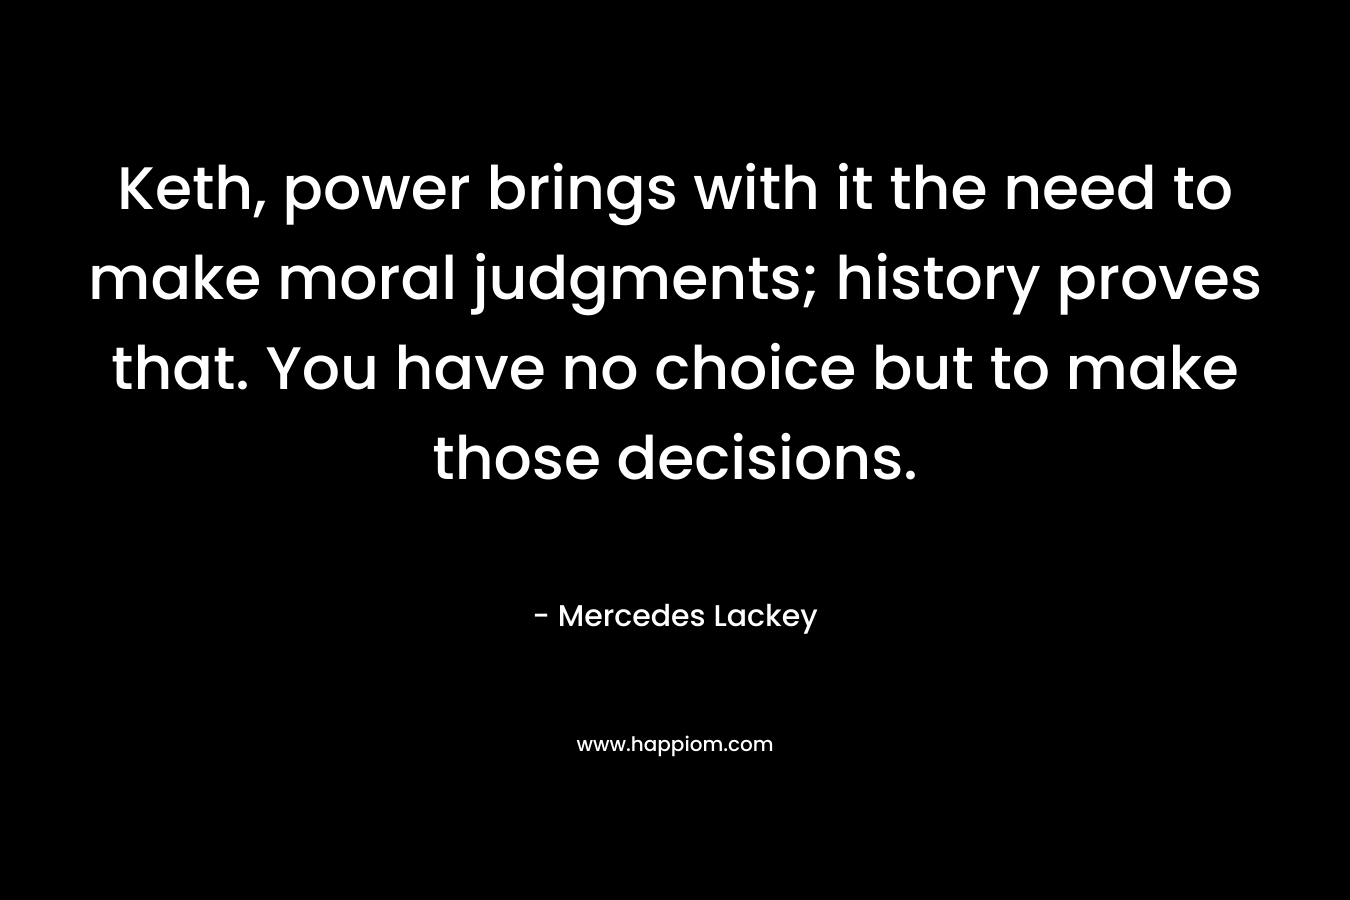 Keth, power brings with it the need to make moral judgments; history proves that. You have no choice but to make those decisions. – Mercedes Lackey